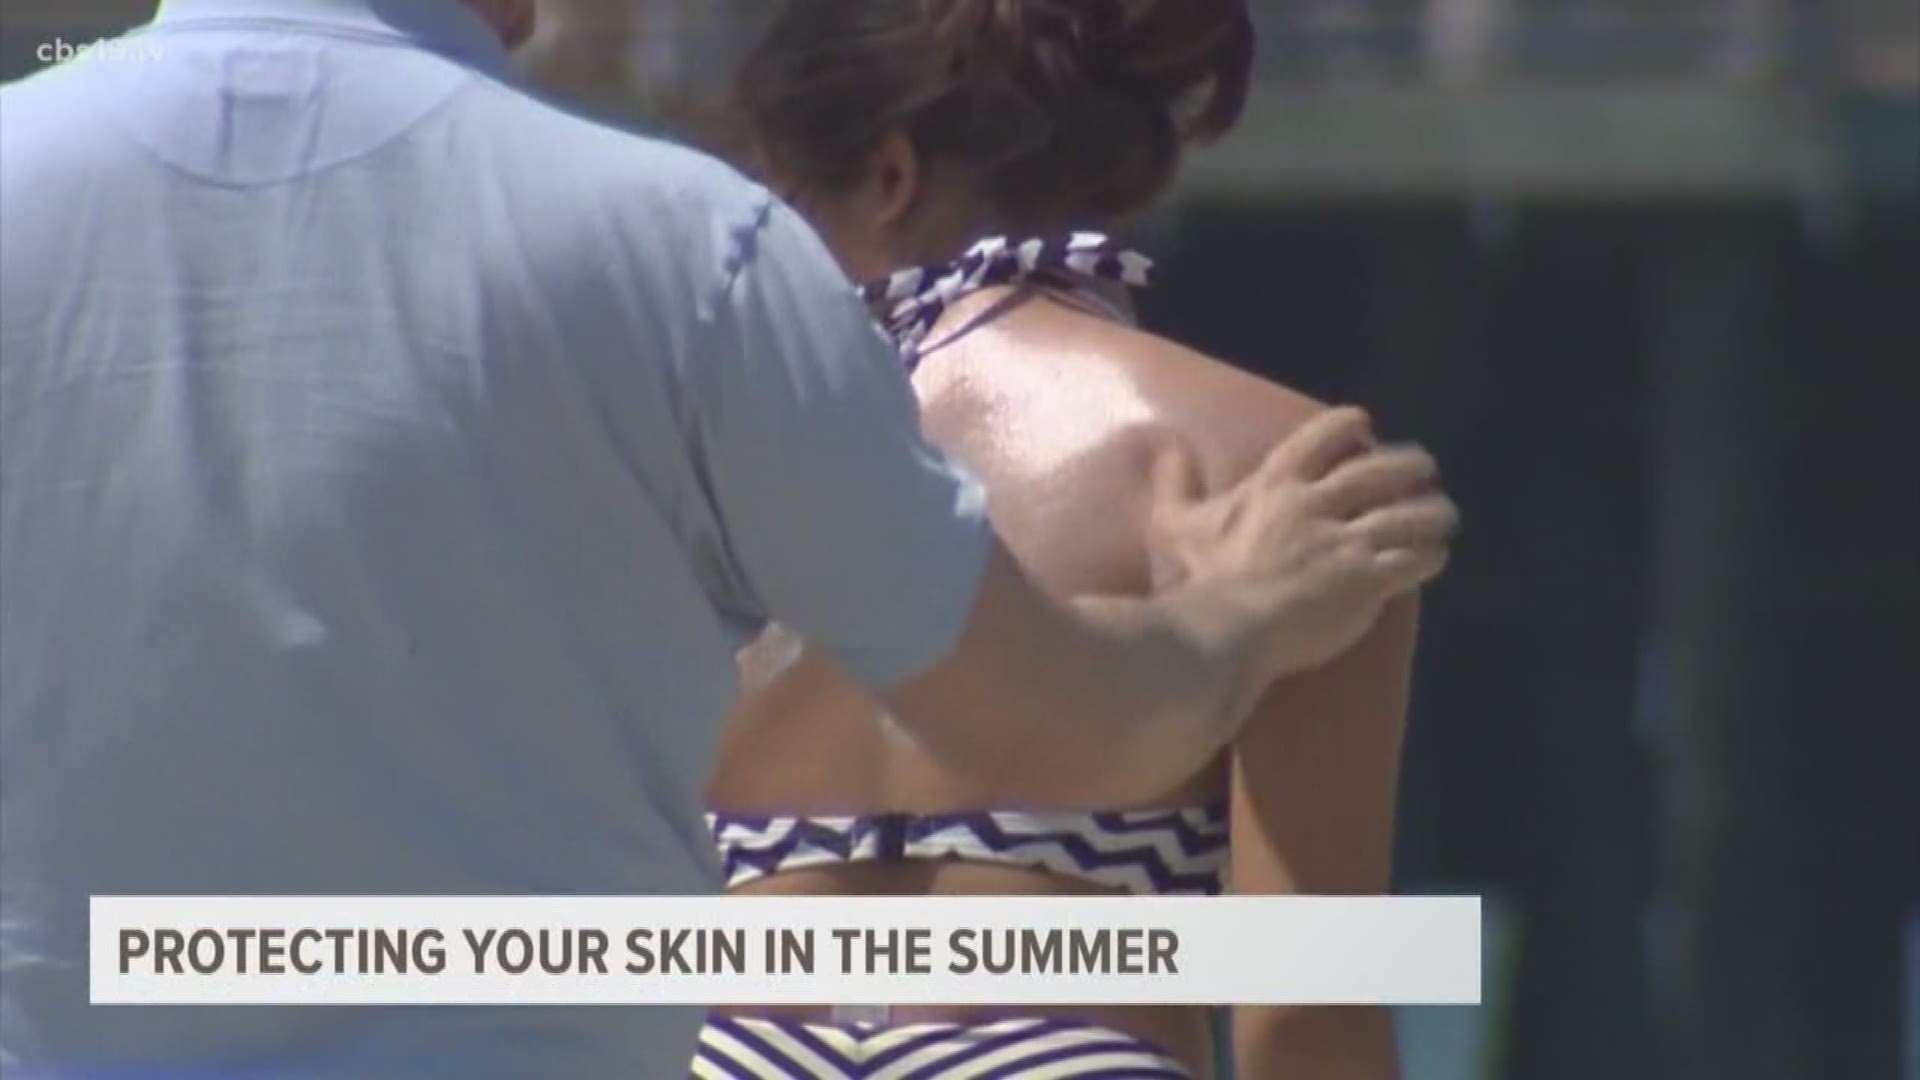 As the temperature heats up protecting your skin should be a top priority. A local dermatologist recommends tips to keep your skin protected against the sun.